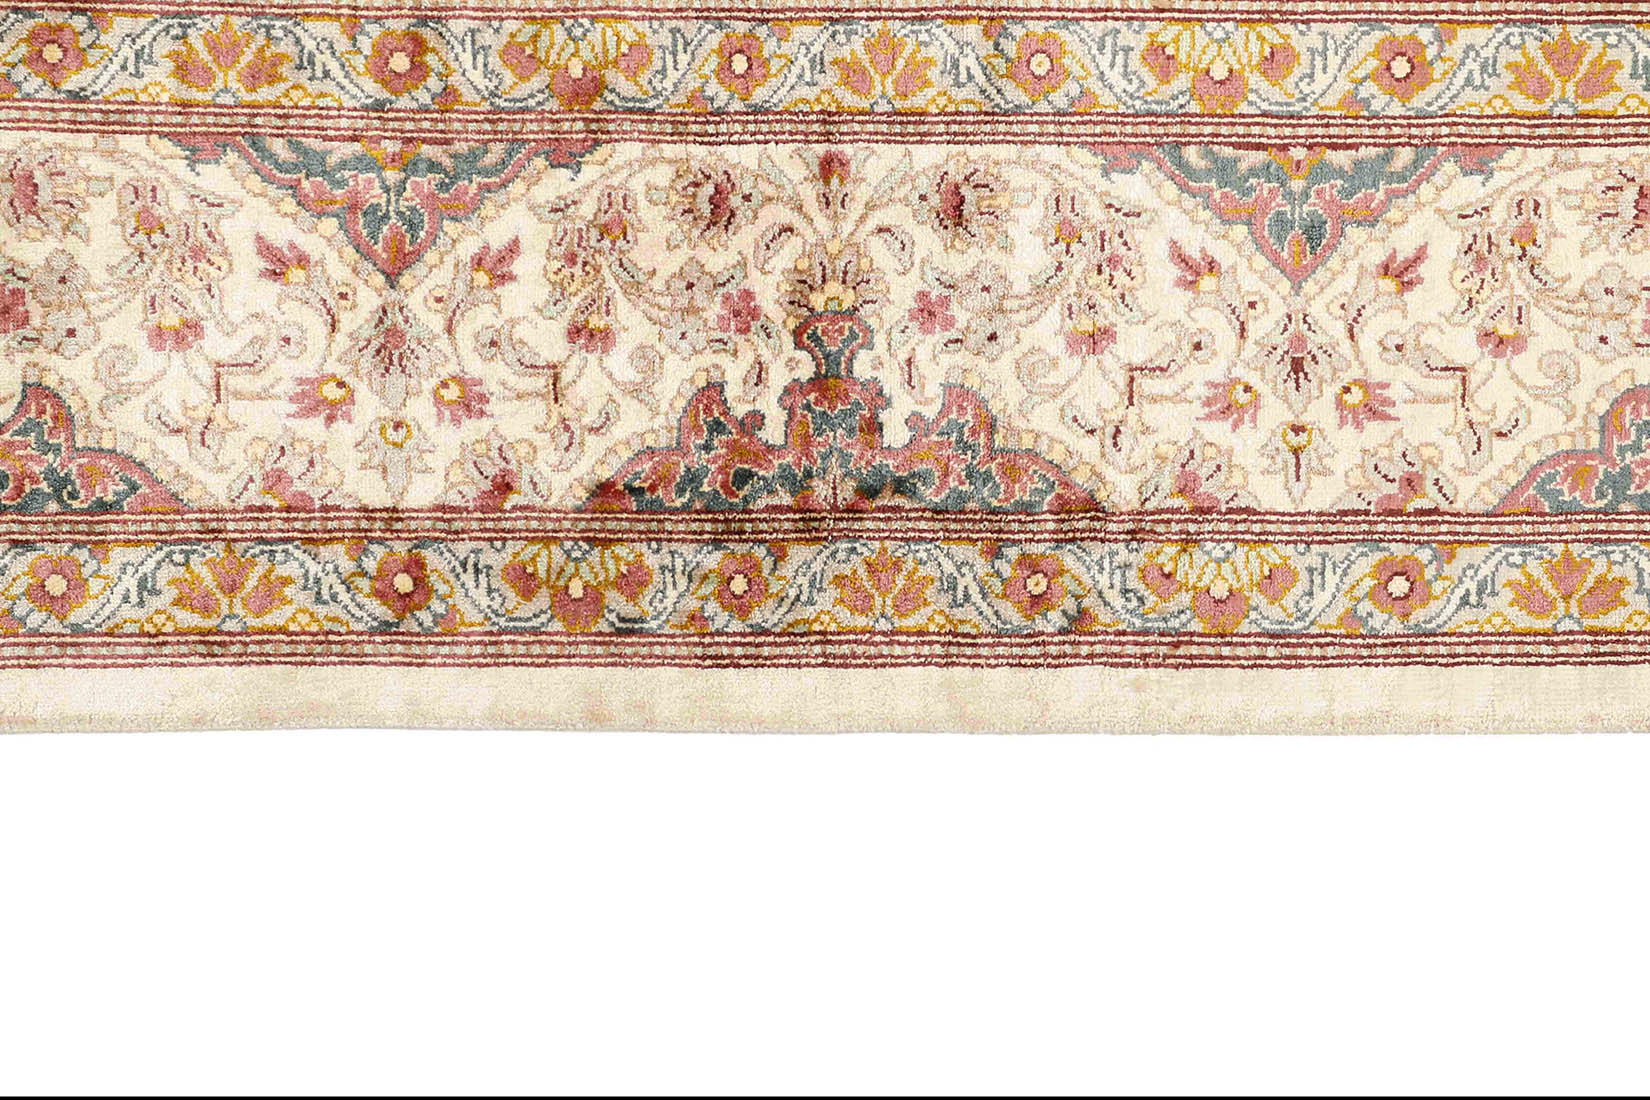 Authentic persian rug with a traditional floral design in beige
